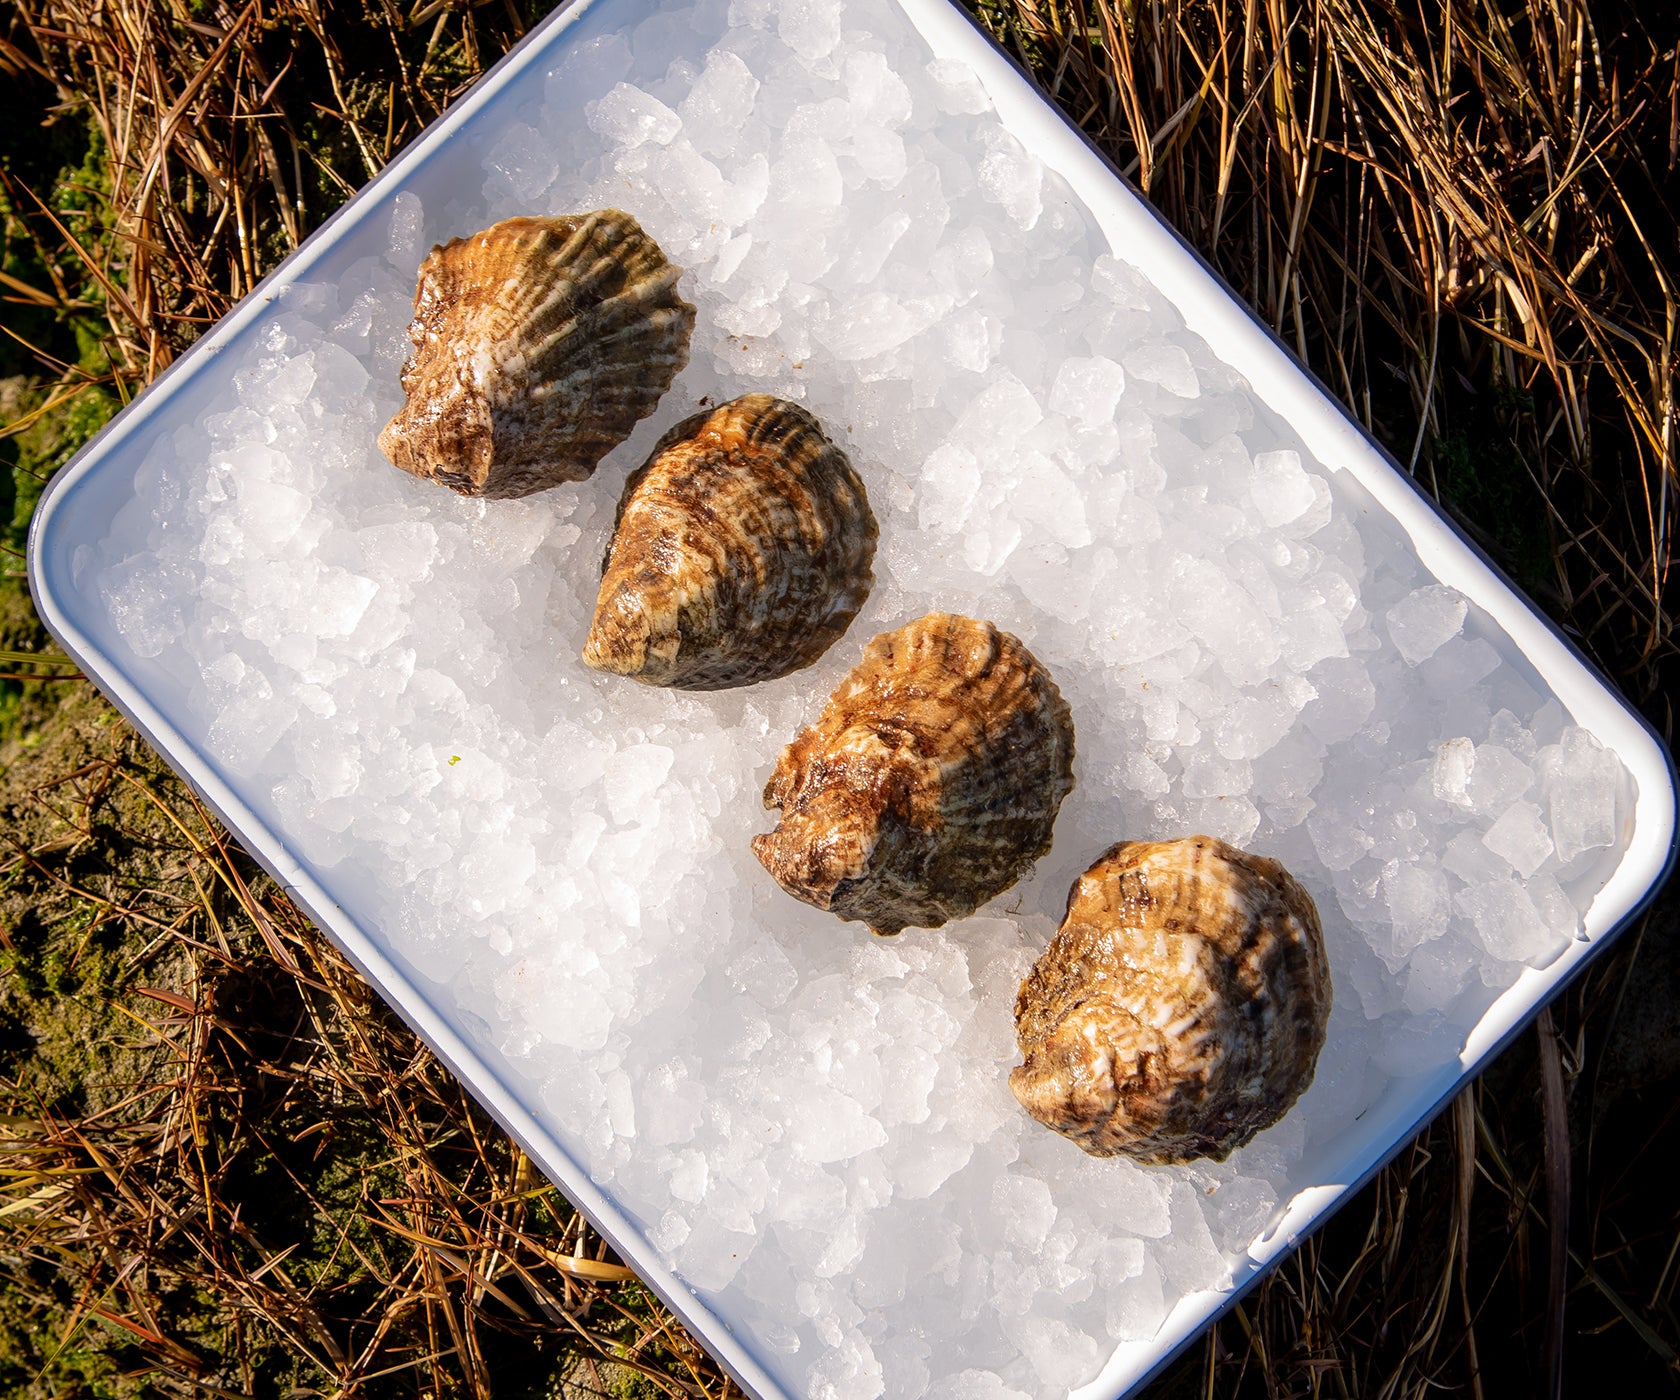 Breakwater Oysters from Portsmouth, RI